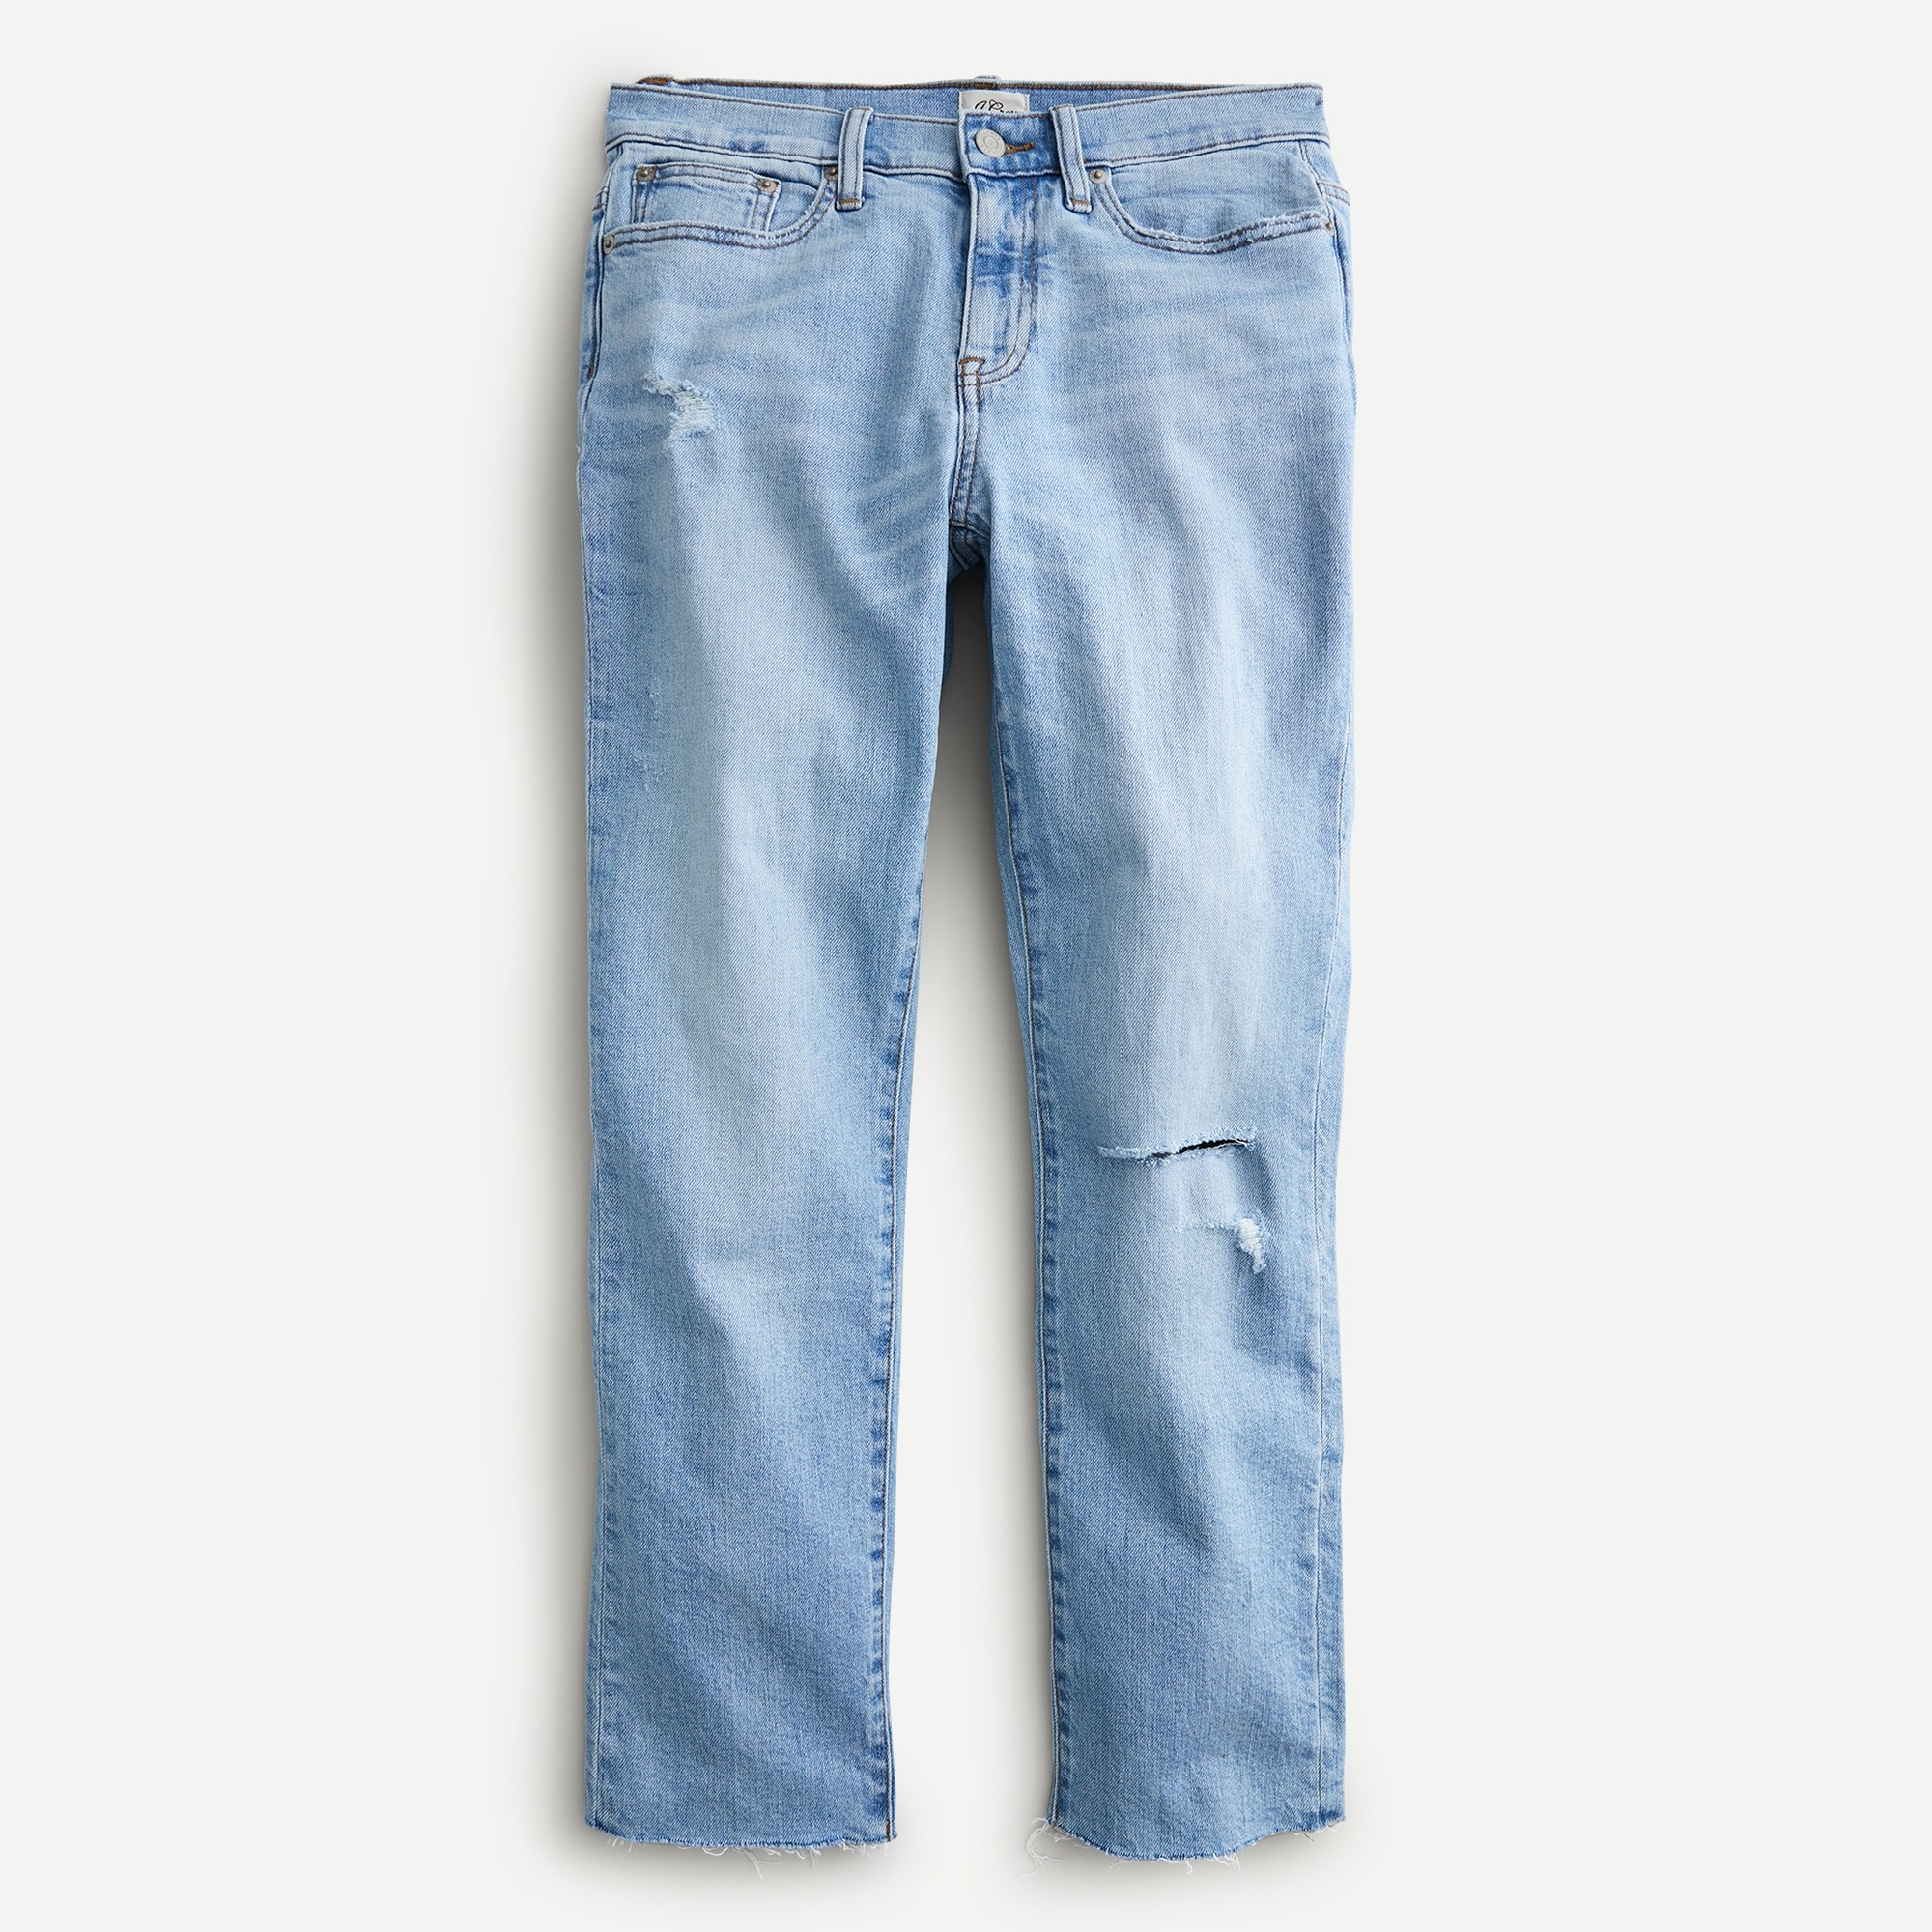 kut from the kloth natalie high rise bootcut jeans